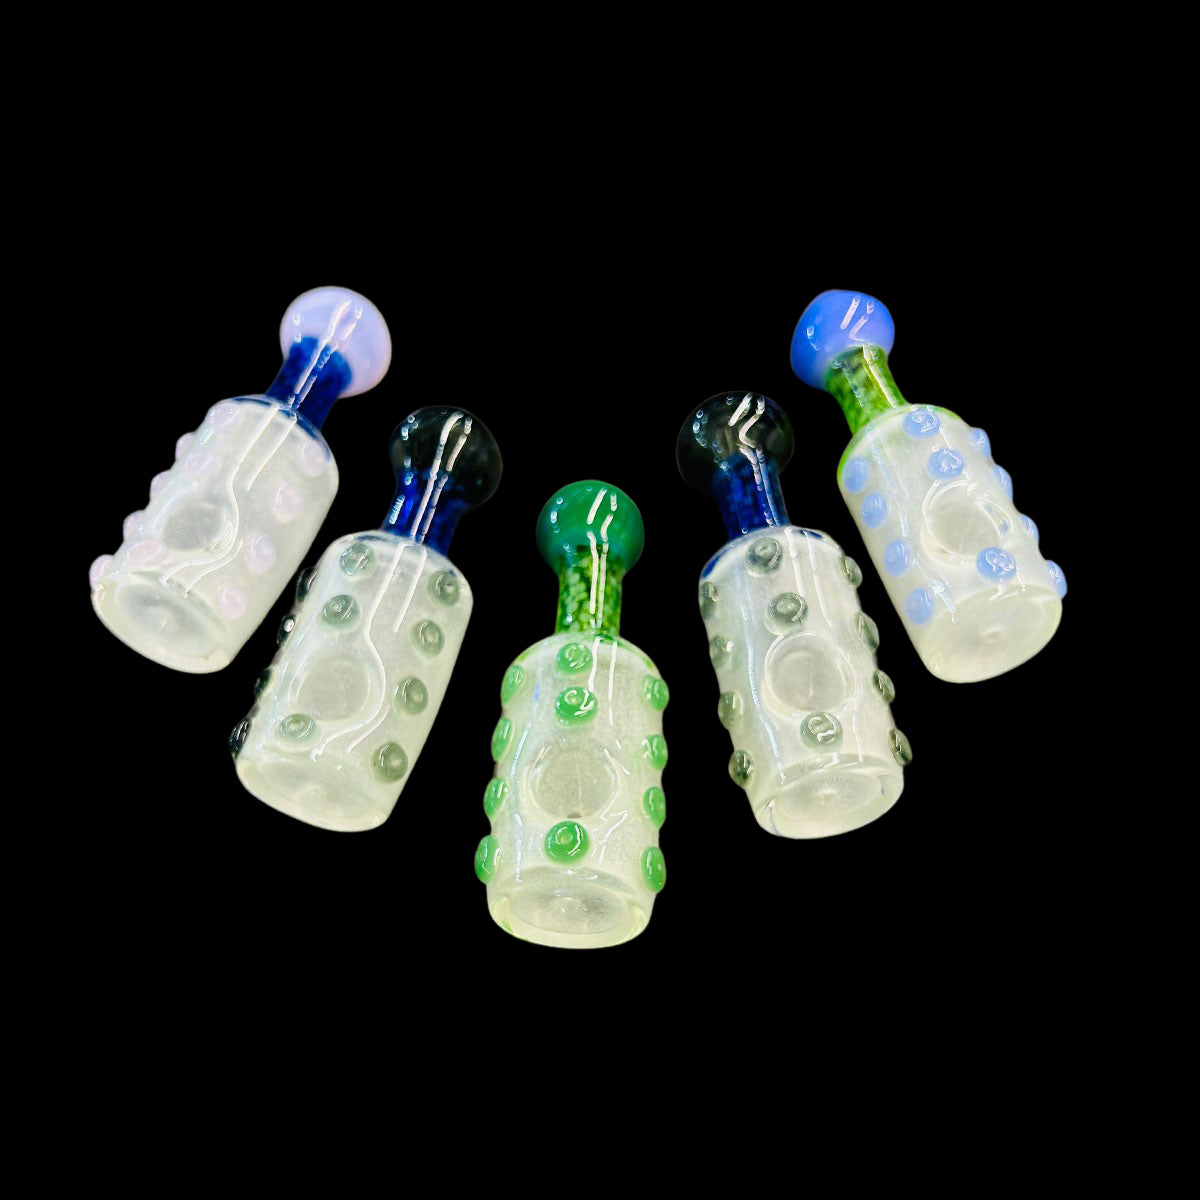 5" Steam Roller Glow In The Dark with knockers